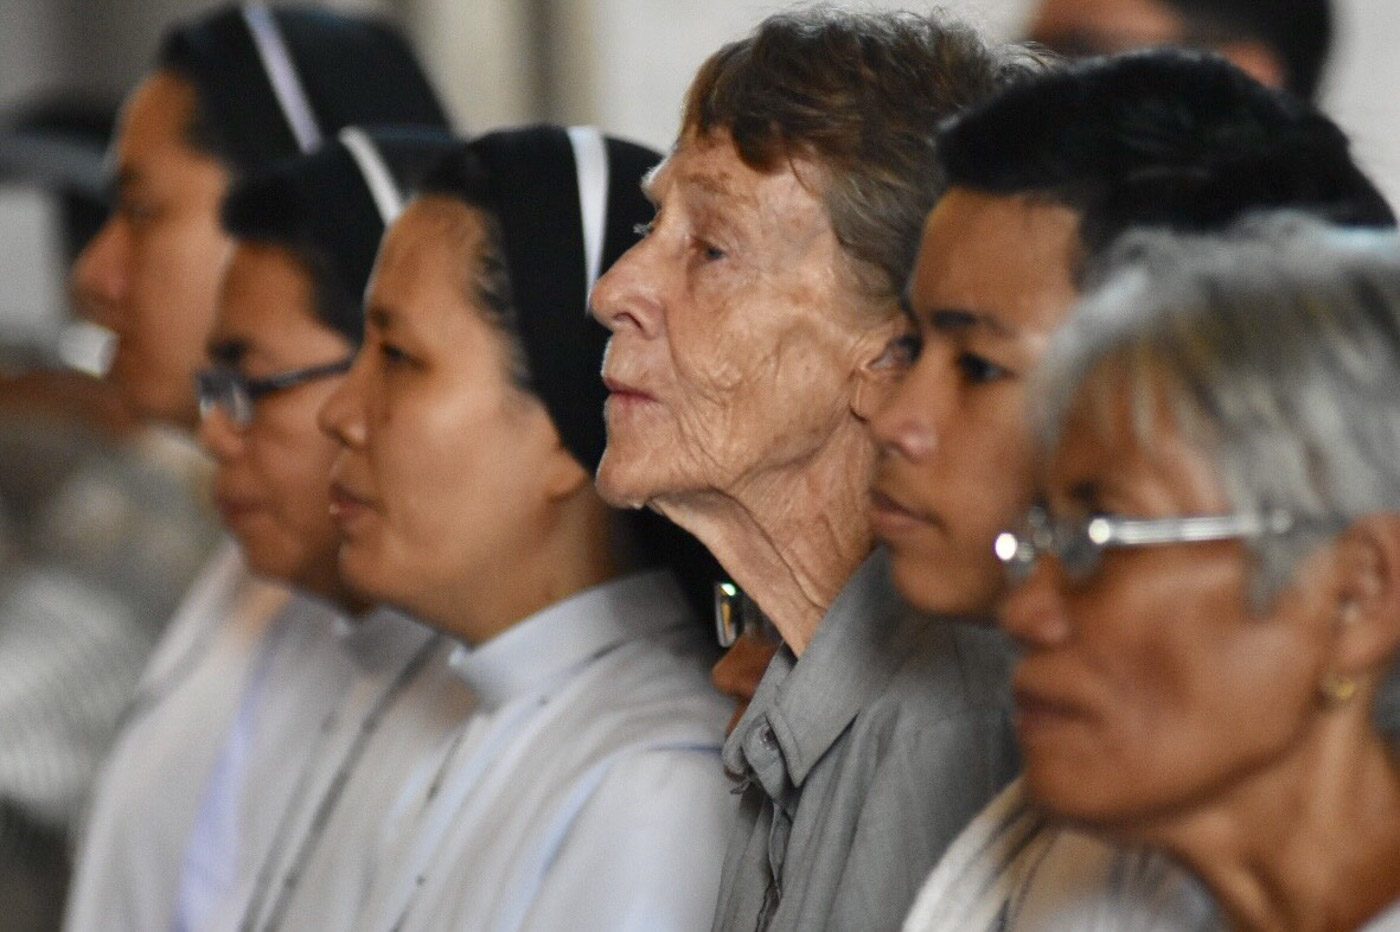 Sister Patricia Fox joins Mass on Martial Law anniversary